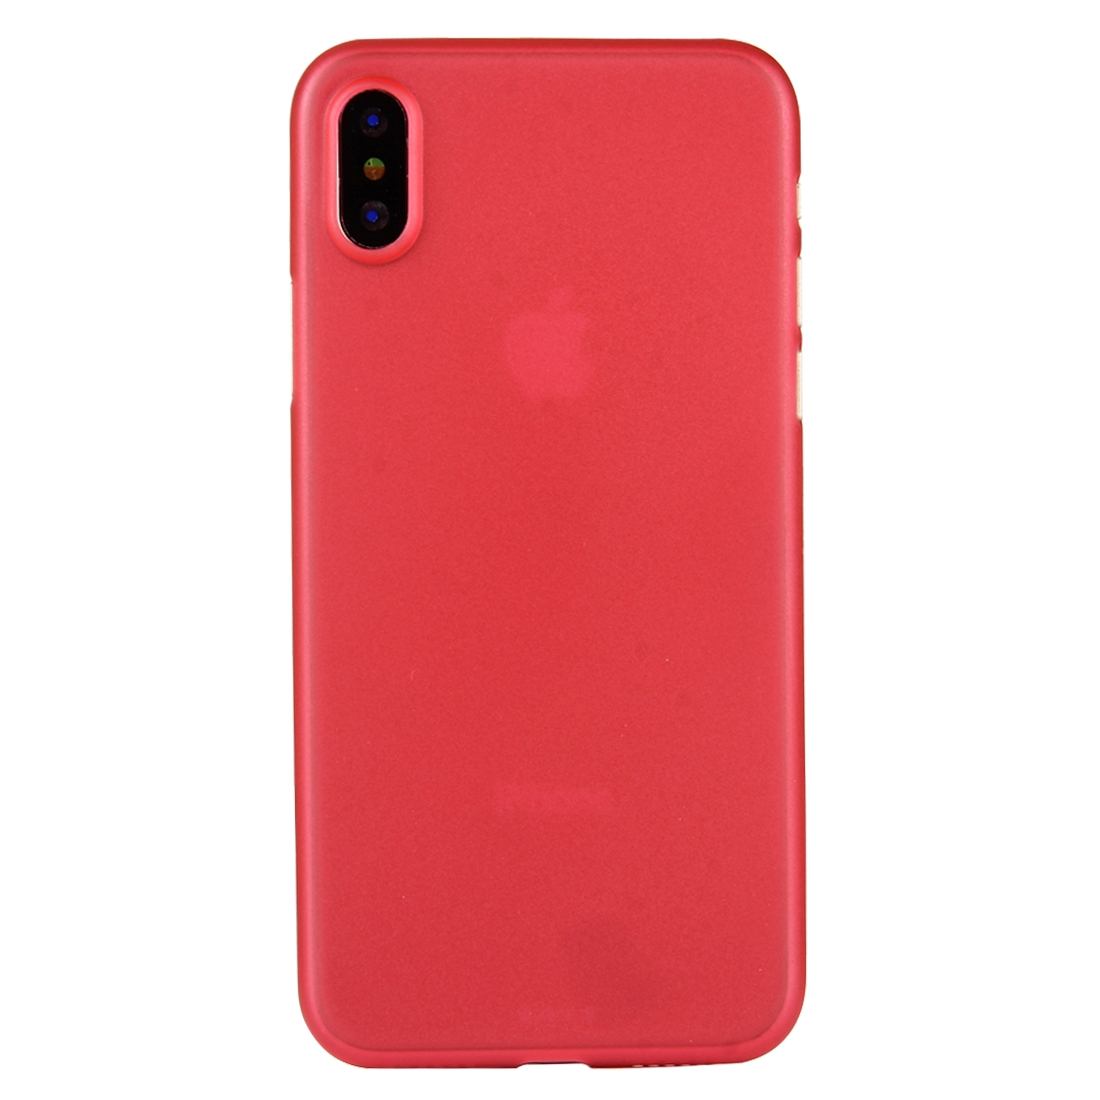 For iPhone XS,X Back Case,Wear-resistant High-Quality Protective Cover,Red